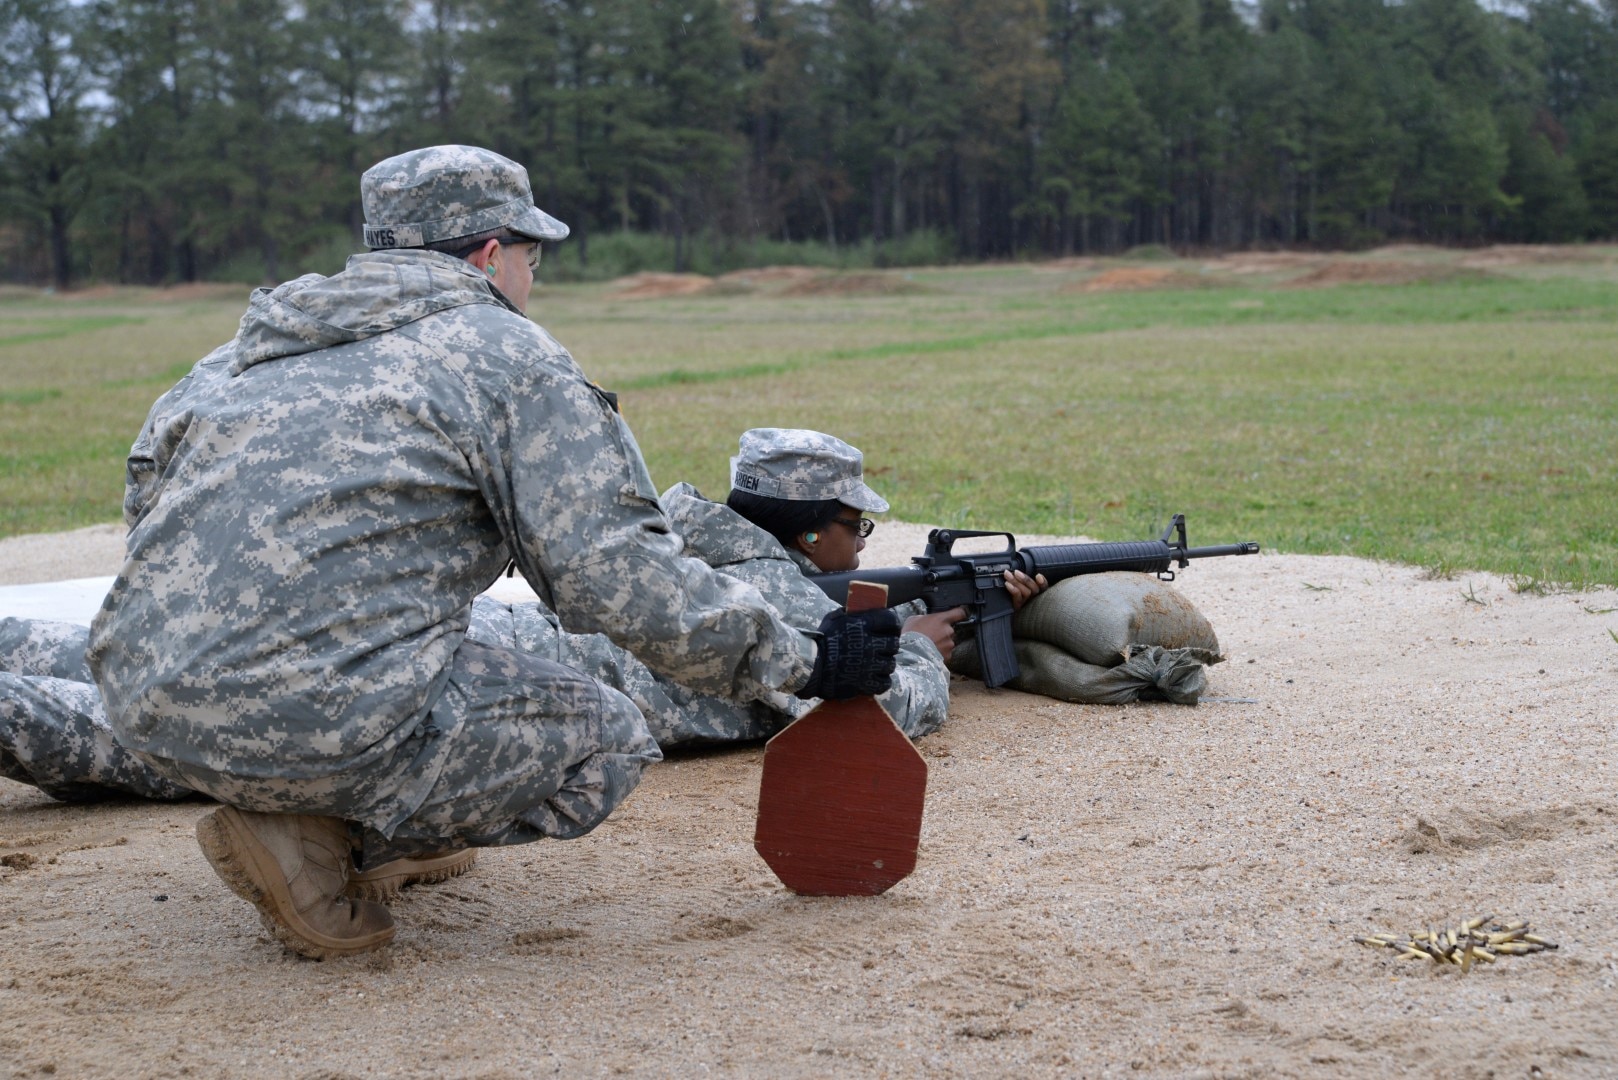 A DLA JRF member fires an M16 rifle during weapons training April 2 at Fort A.P. Hill, Va. The goal was to gain familiarization with the weapons for combat readiness and to qualify for deployments.